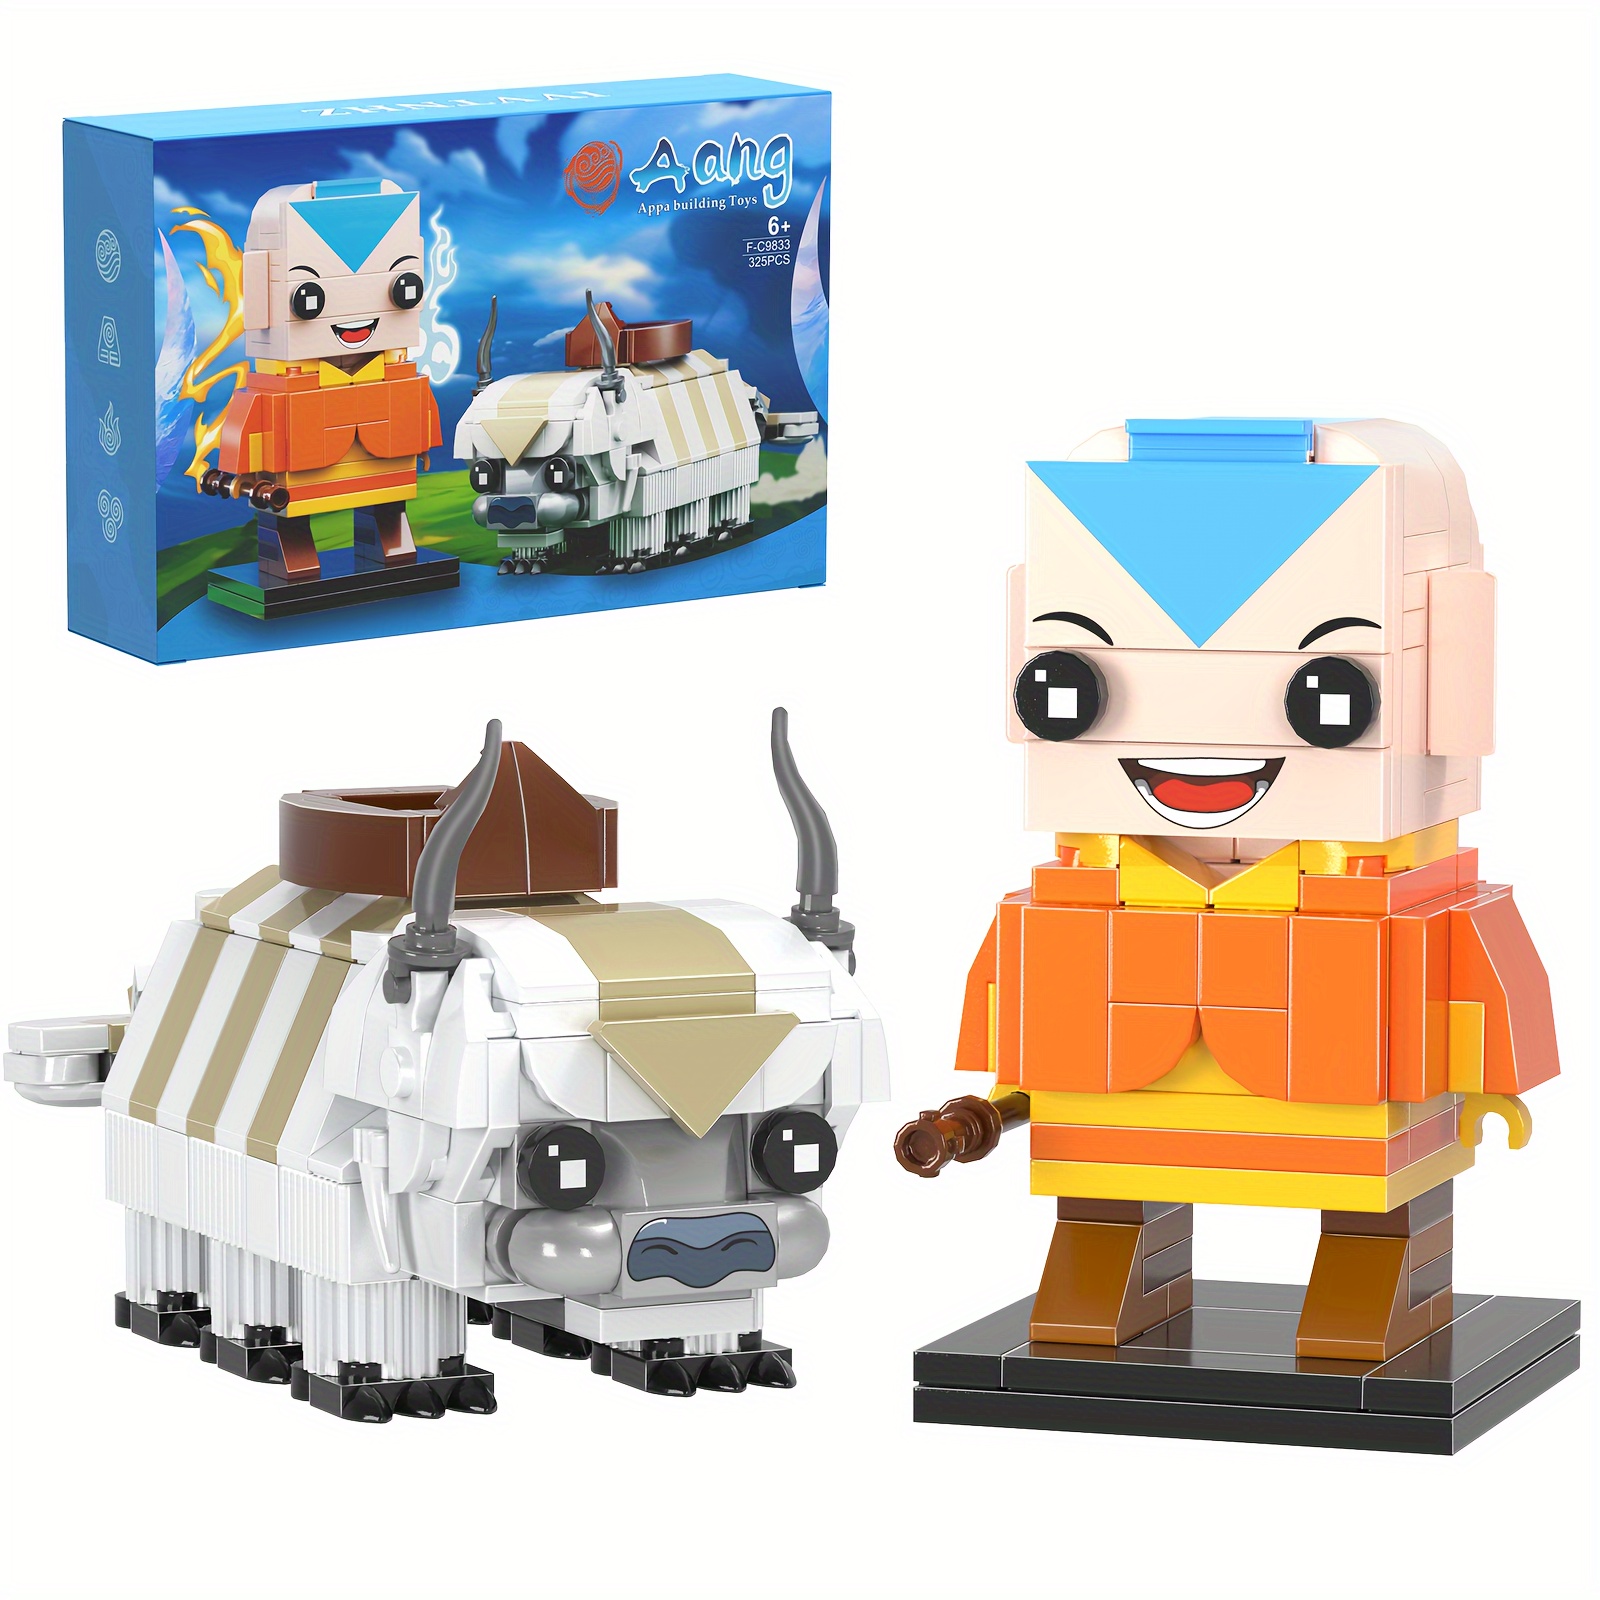 

325 Pieces Action Figure Model, Aang, Momo, Appa Building Blocks Toys Set From Movie With Gift Box, Collection Decoration Gift